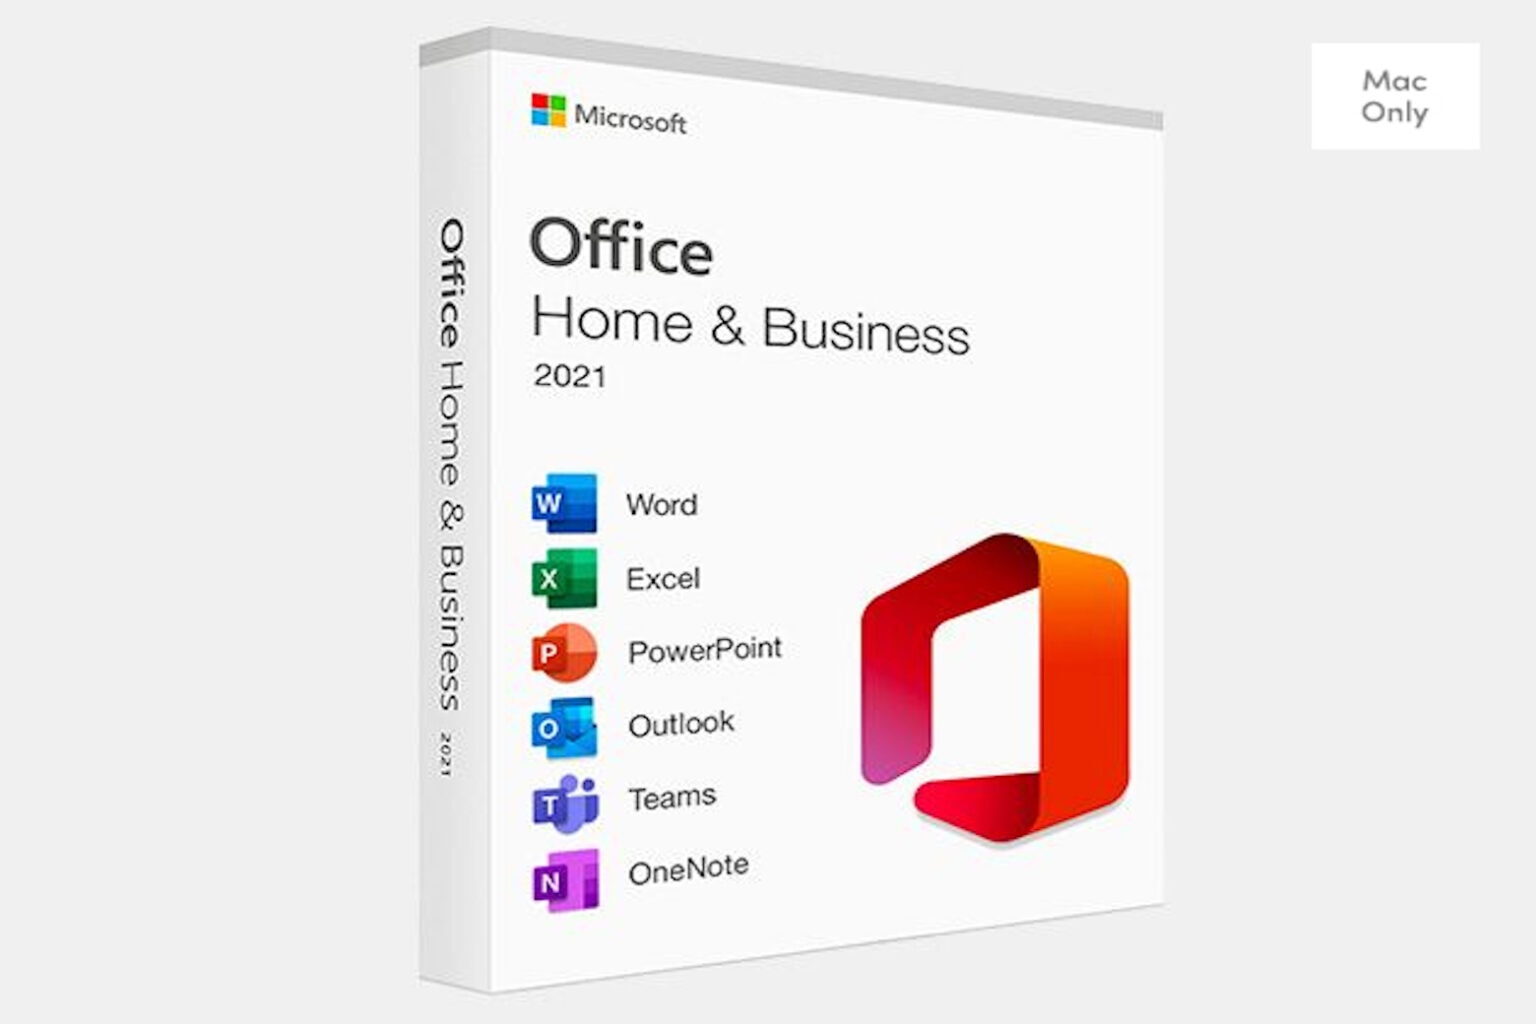 Access Microsoft Office on your Mac or Windows computer for life for just $40.